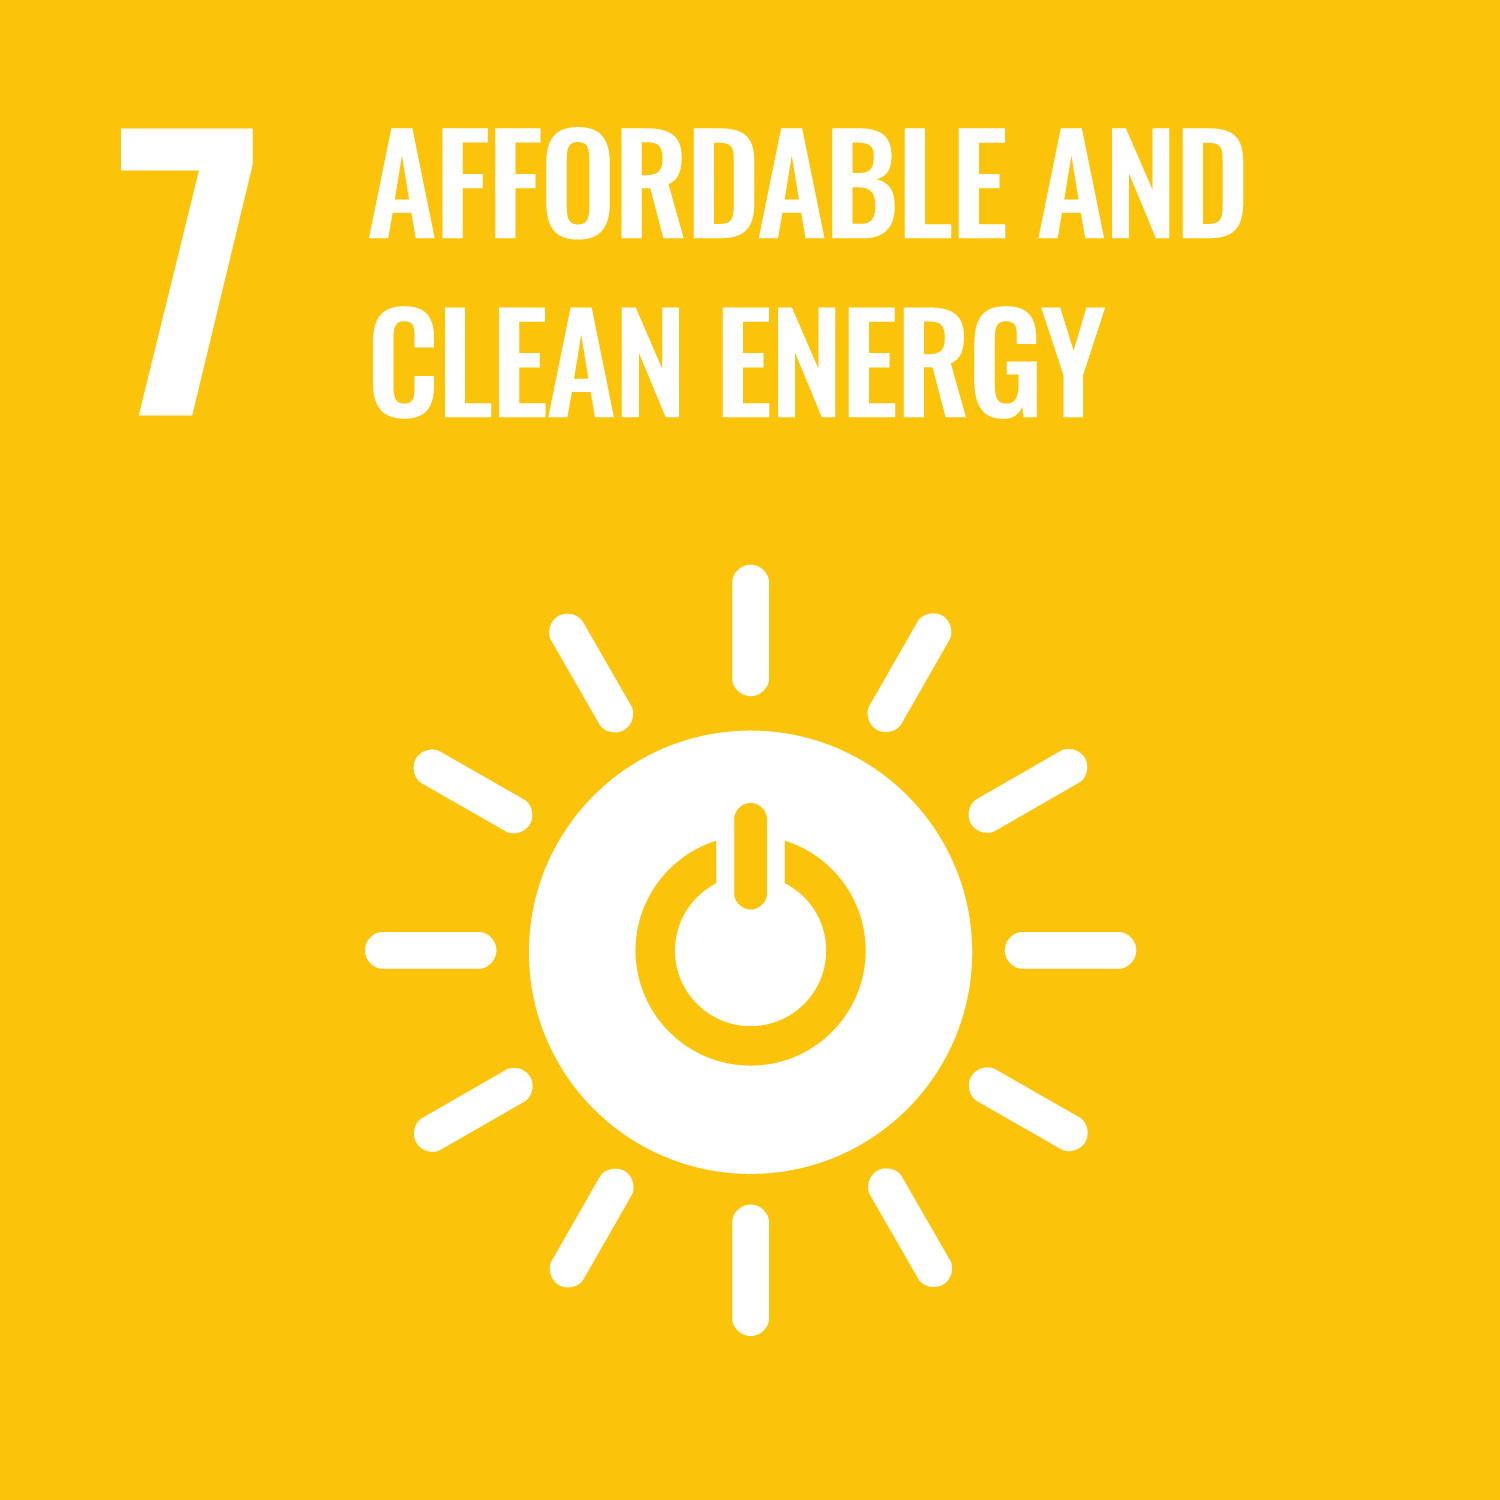 SDG 7 - Affordable and Clean Energy